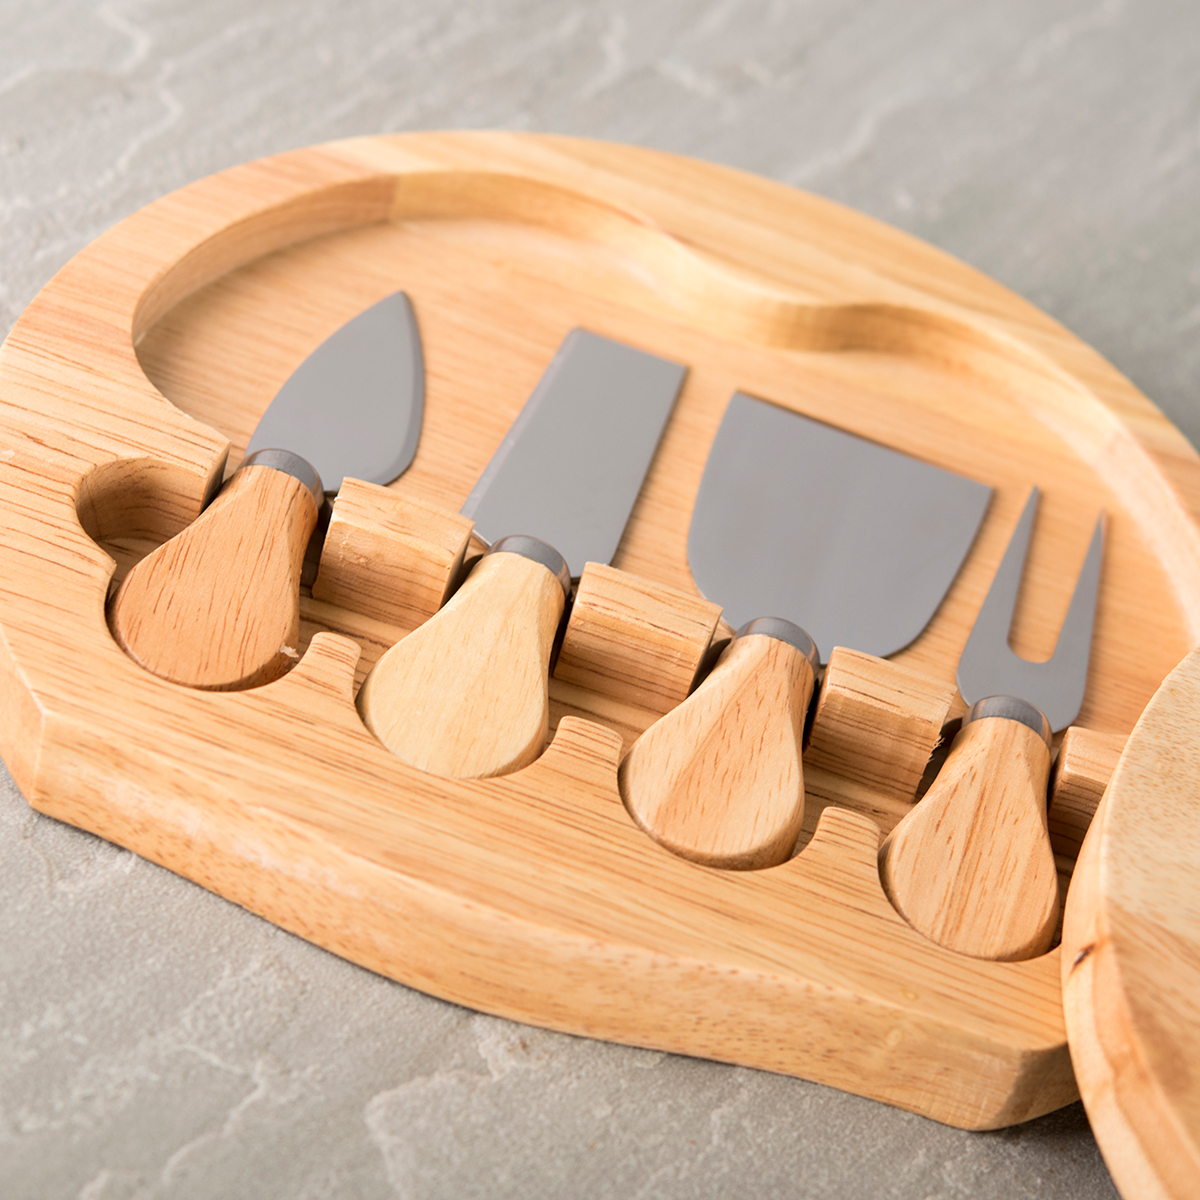 Personalised Wooden Cheeseboard Set - Dad You're Grate